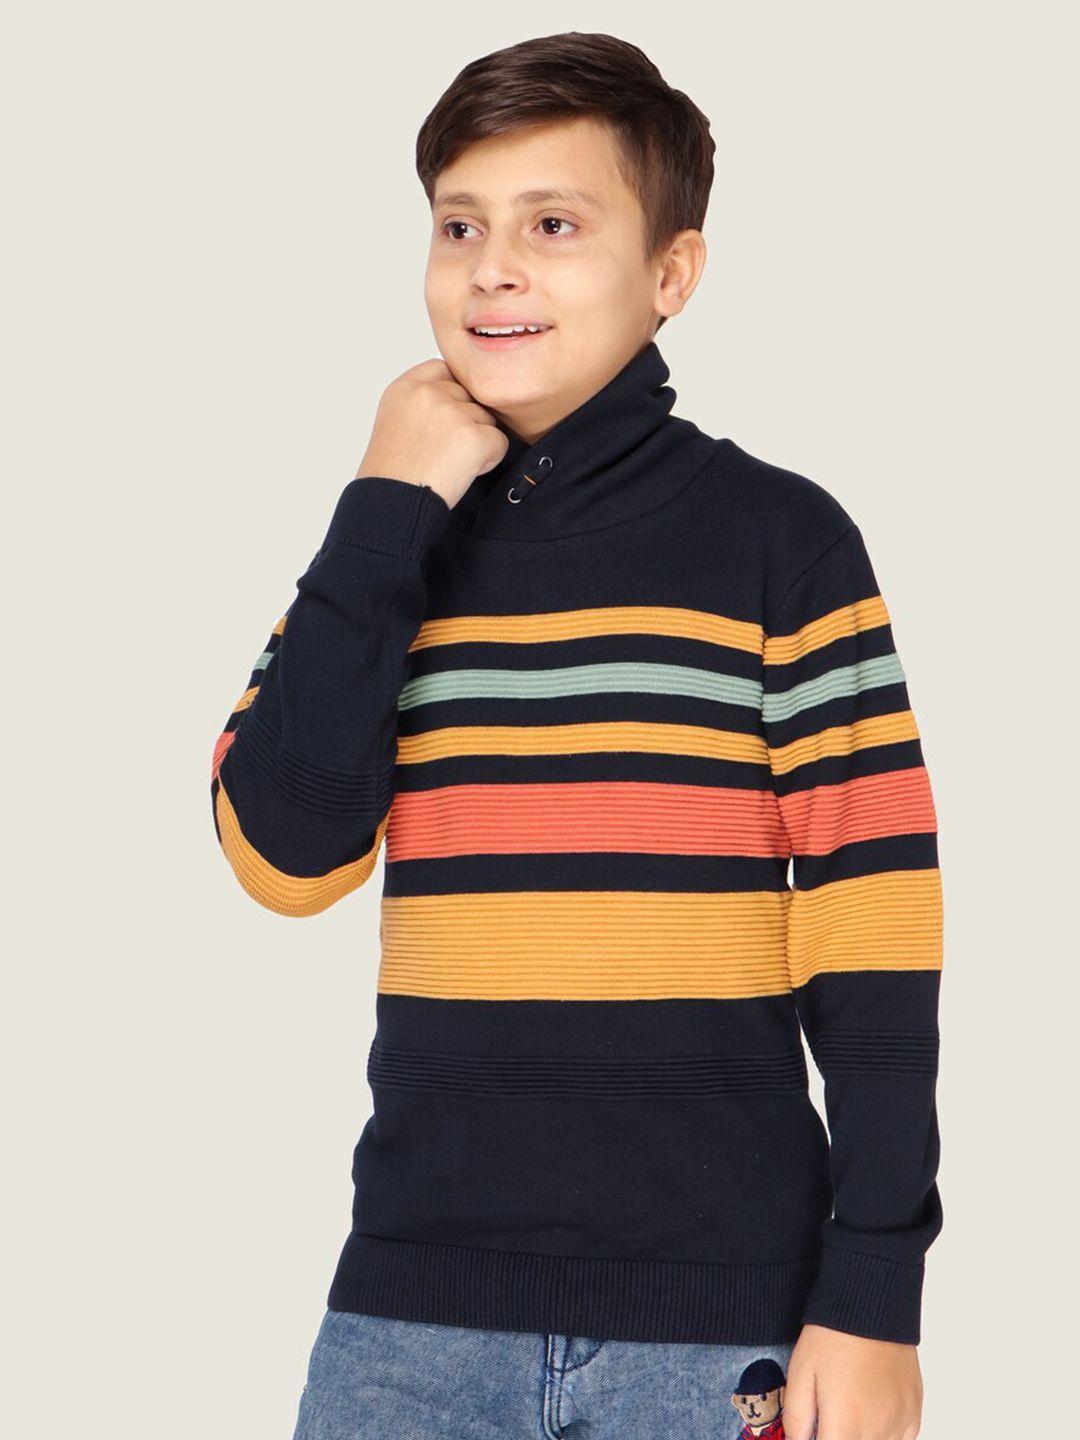 lasnak boys navy blue & yellow striped cotton pullover sweater